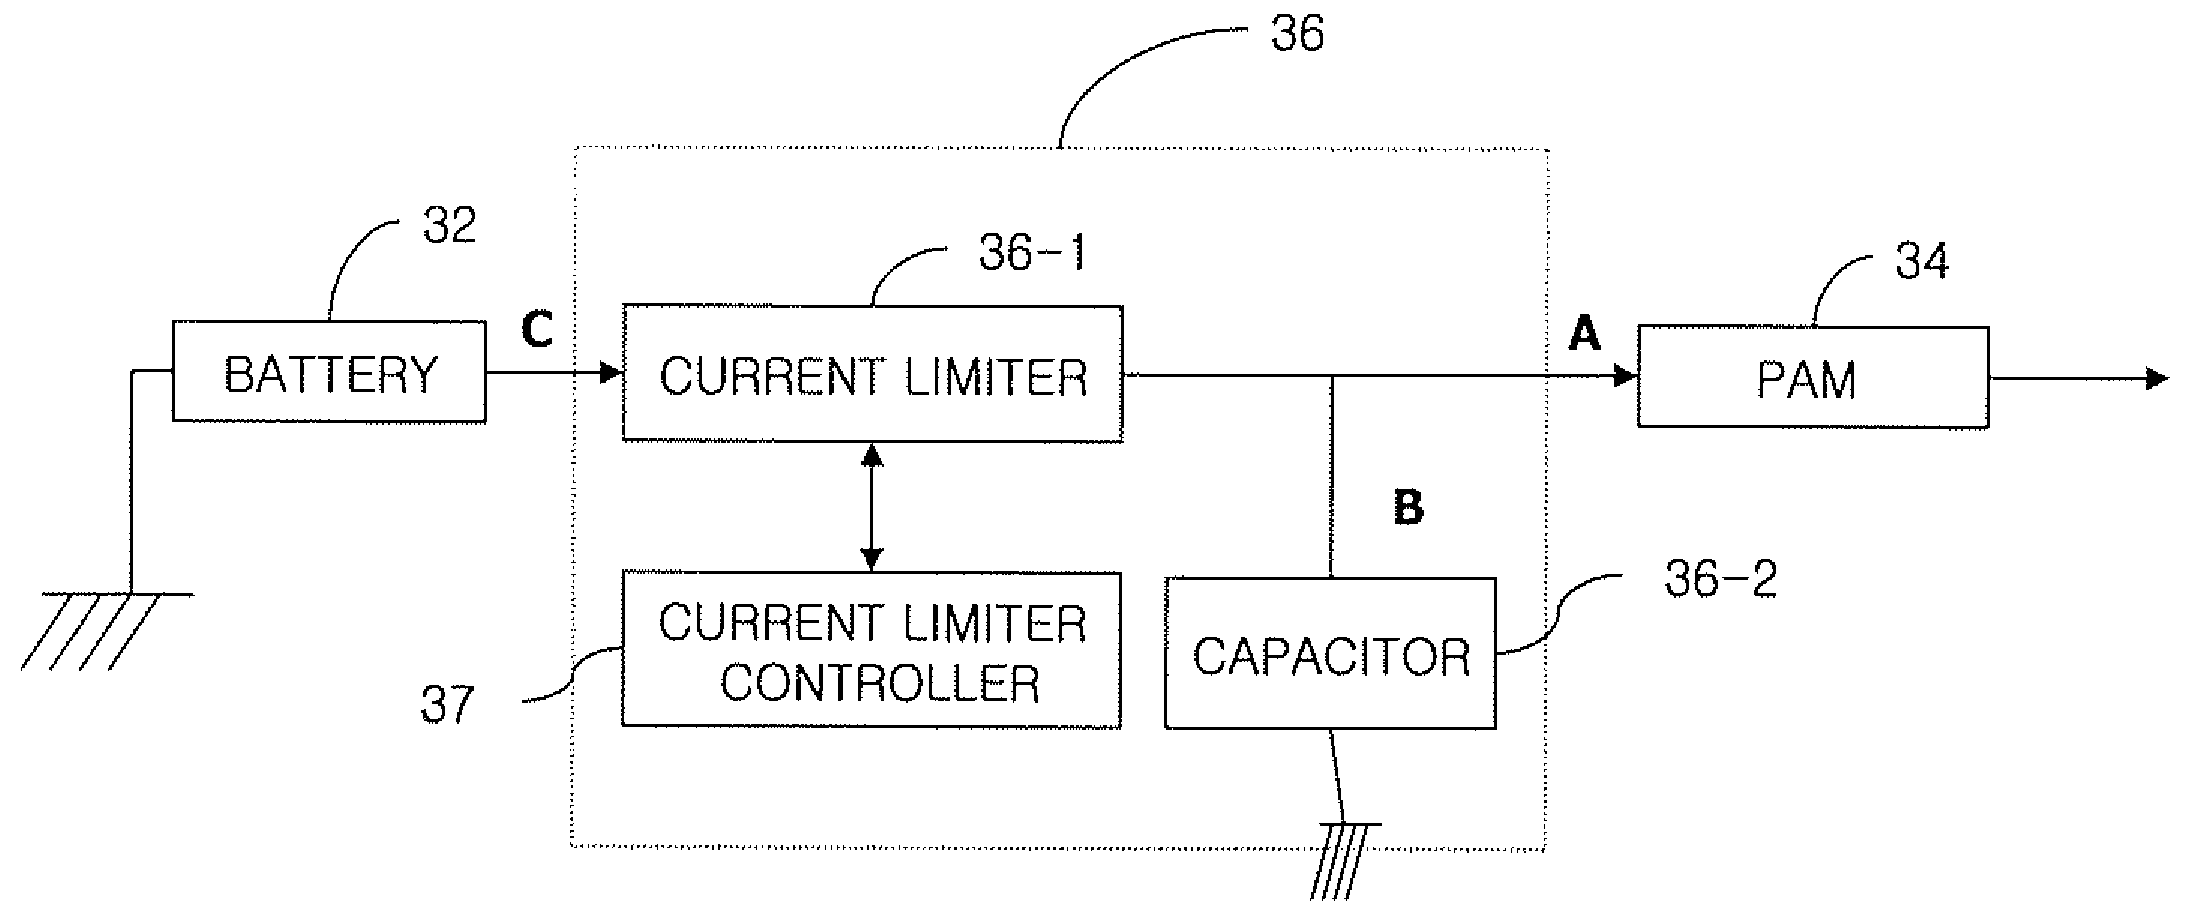 Apparatus and method for conserving battery charge